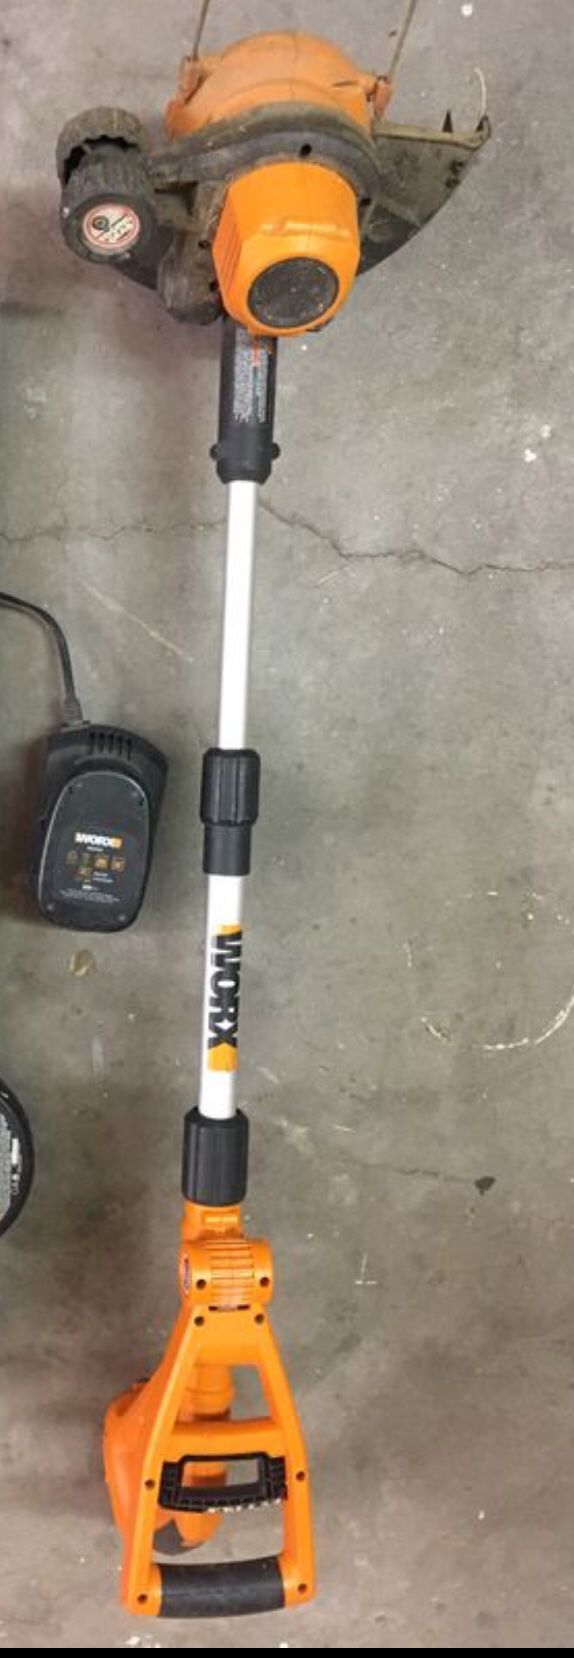 Worx weed eater, battery and charger